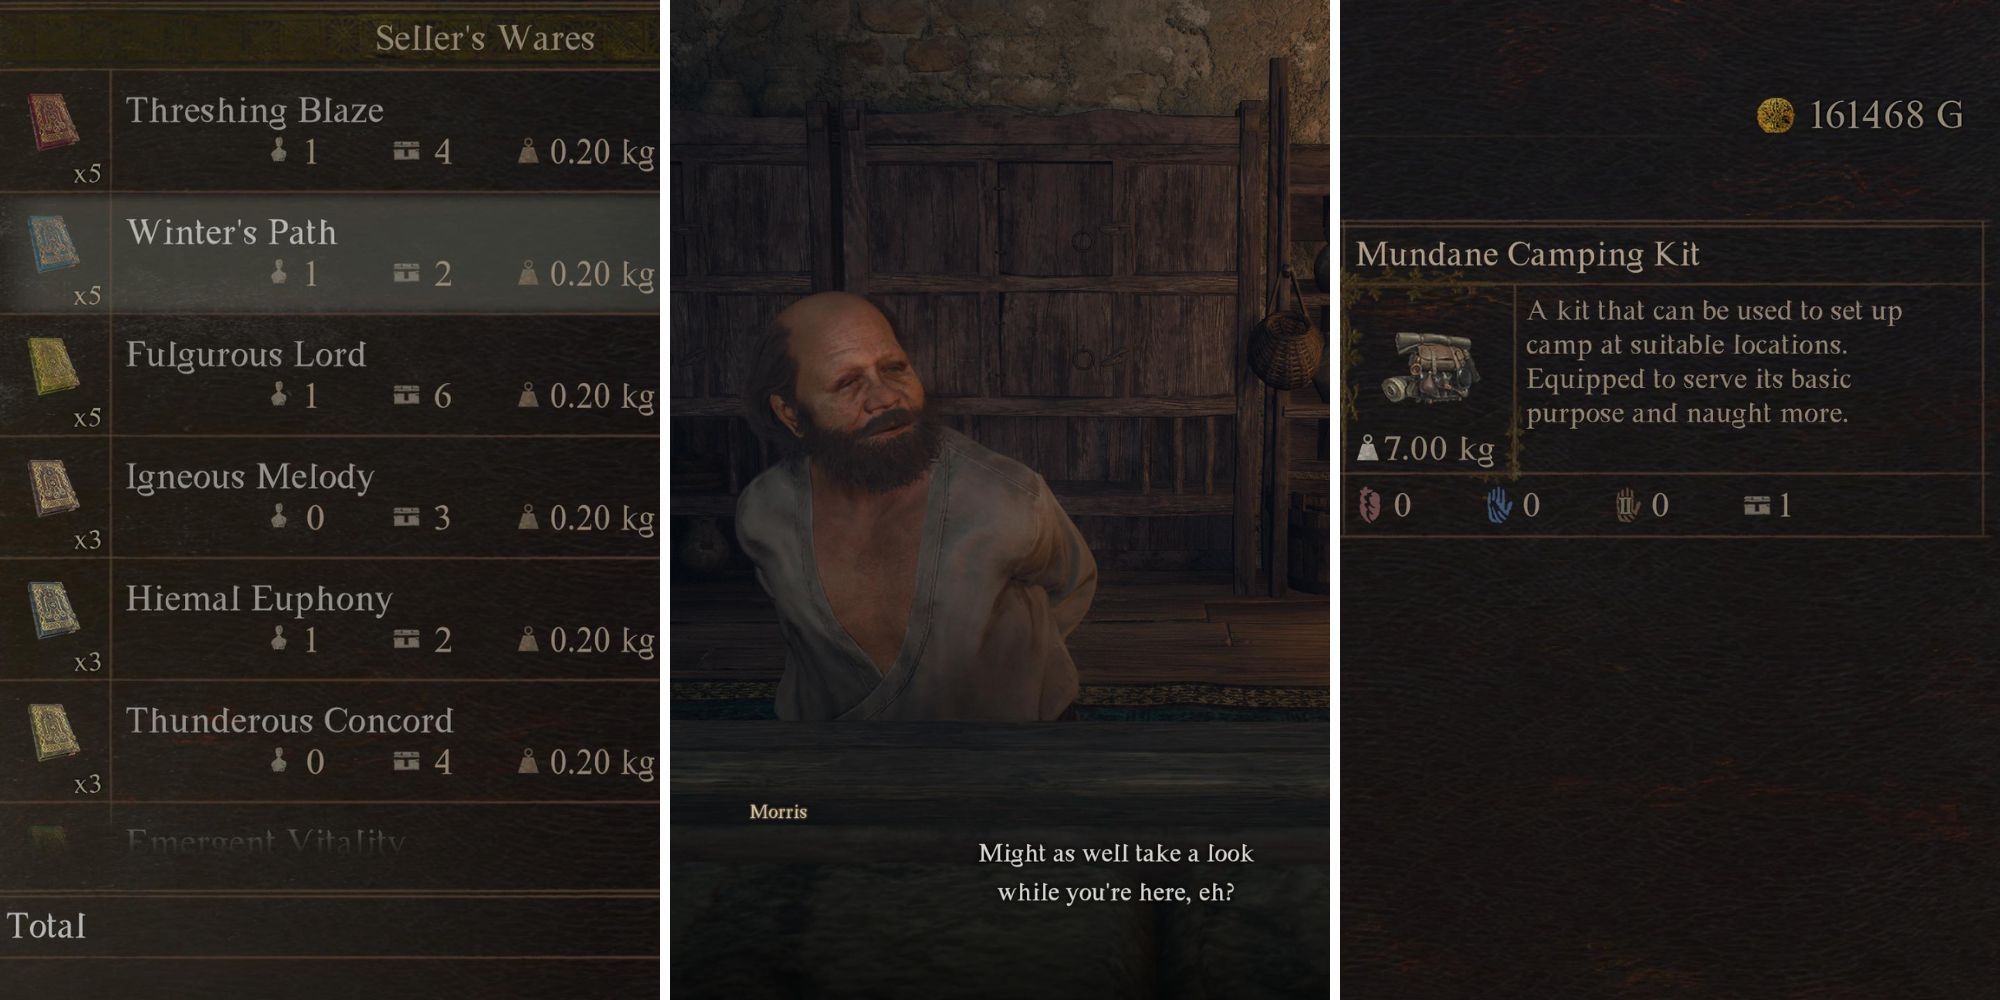 A grid showing a merchant and his wares in Dragon’s Dogma 2